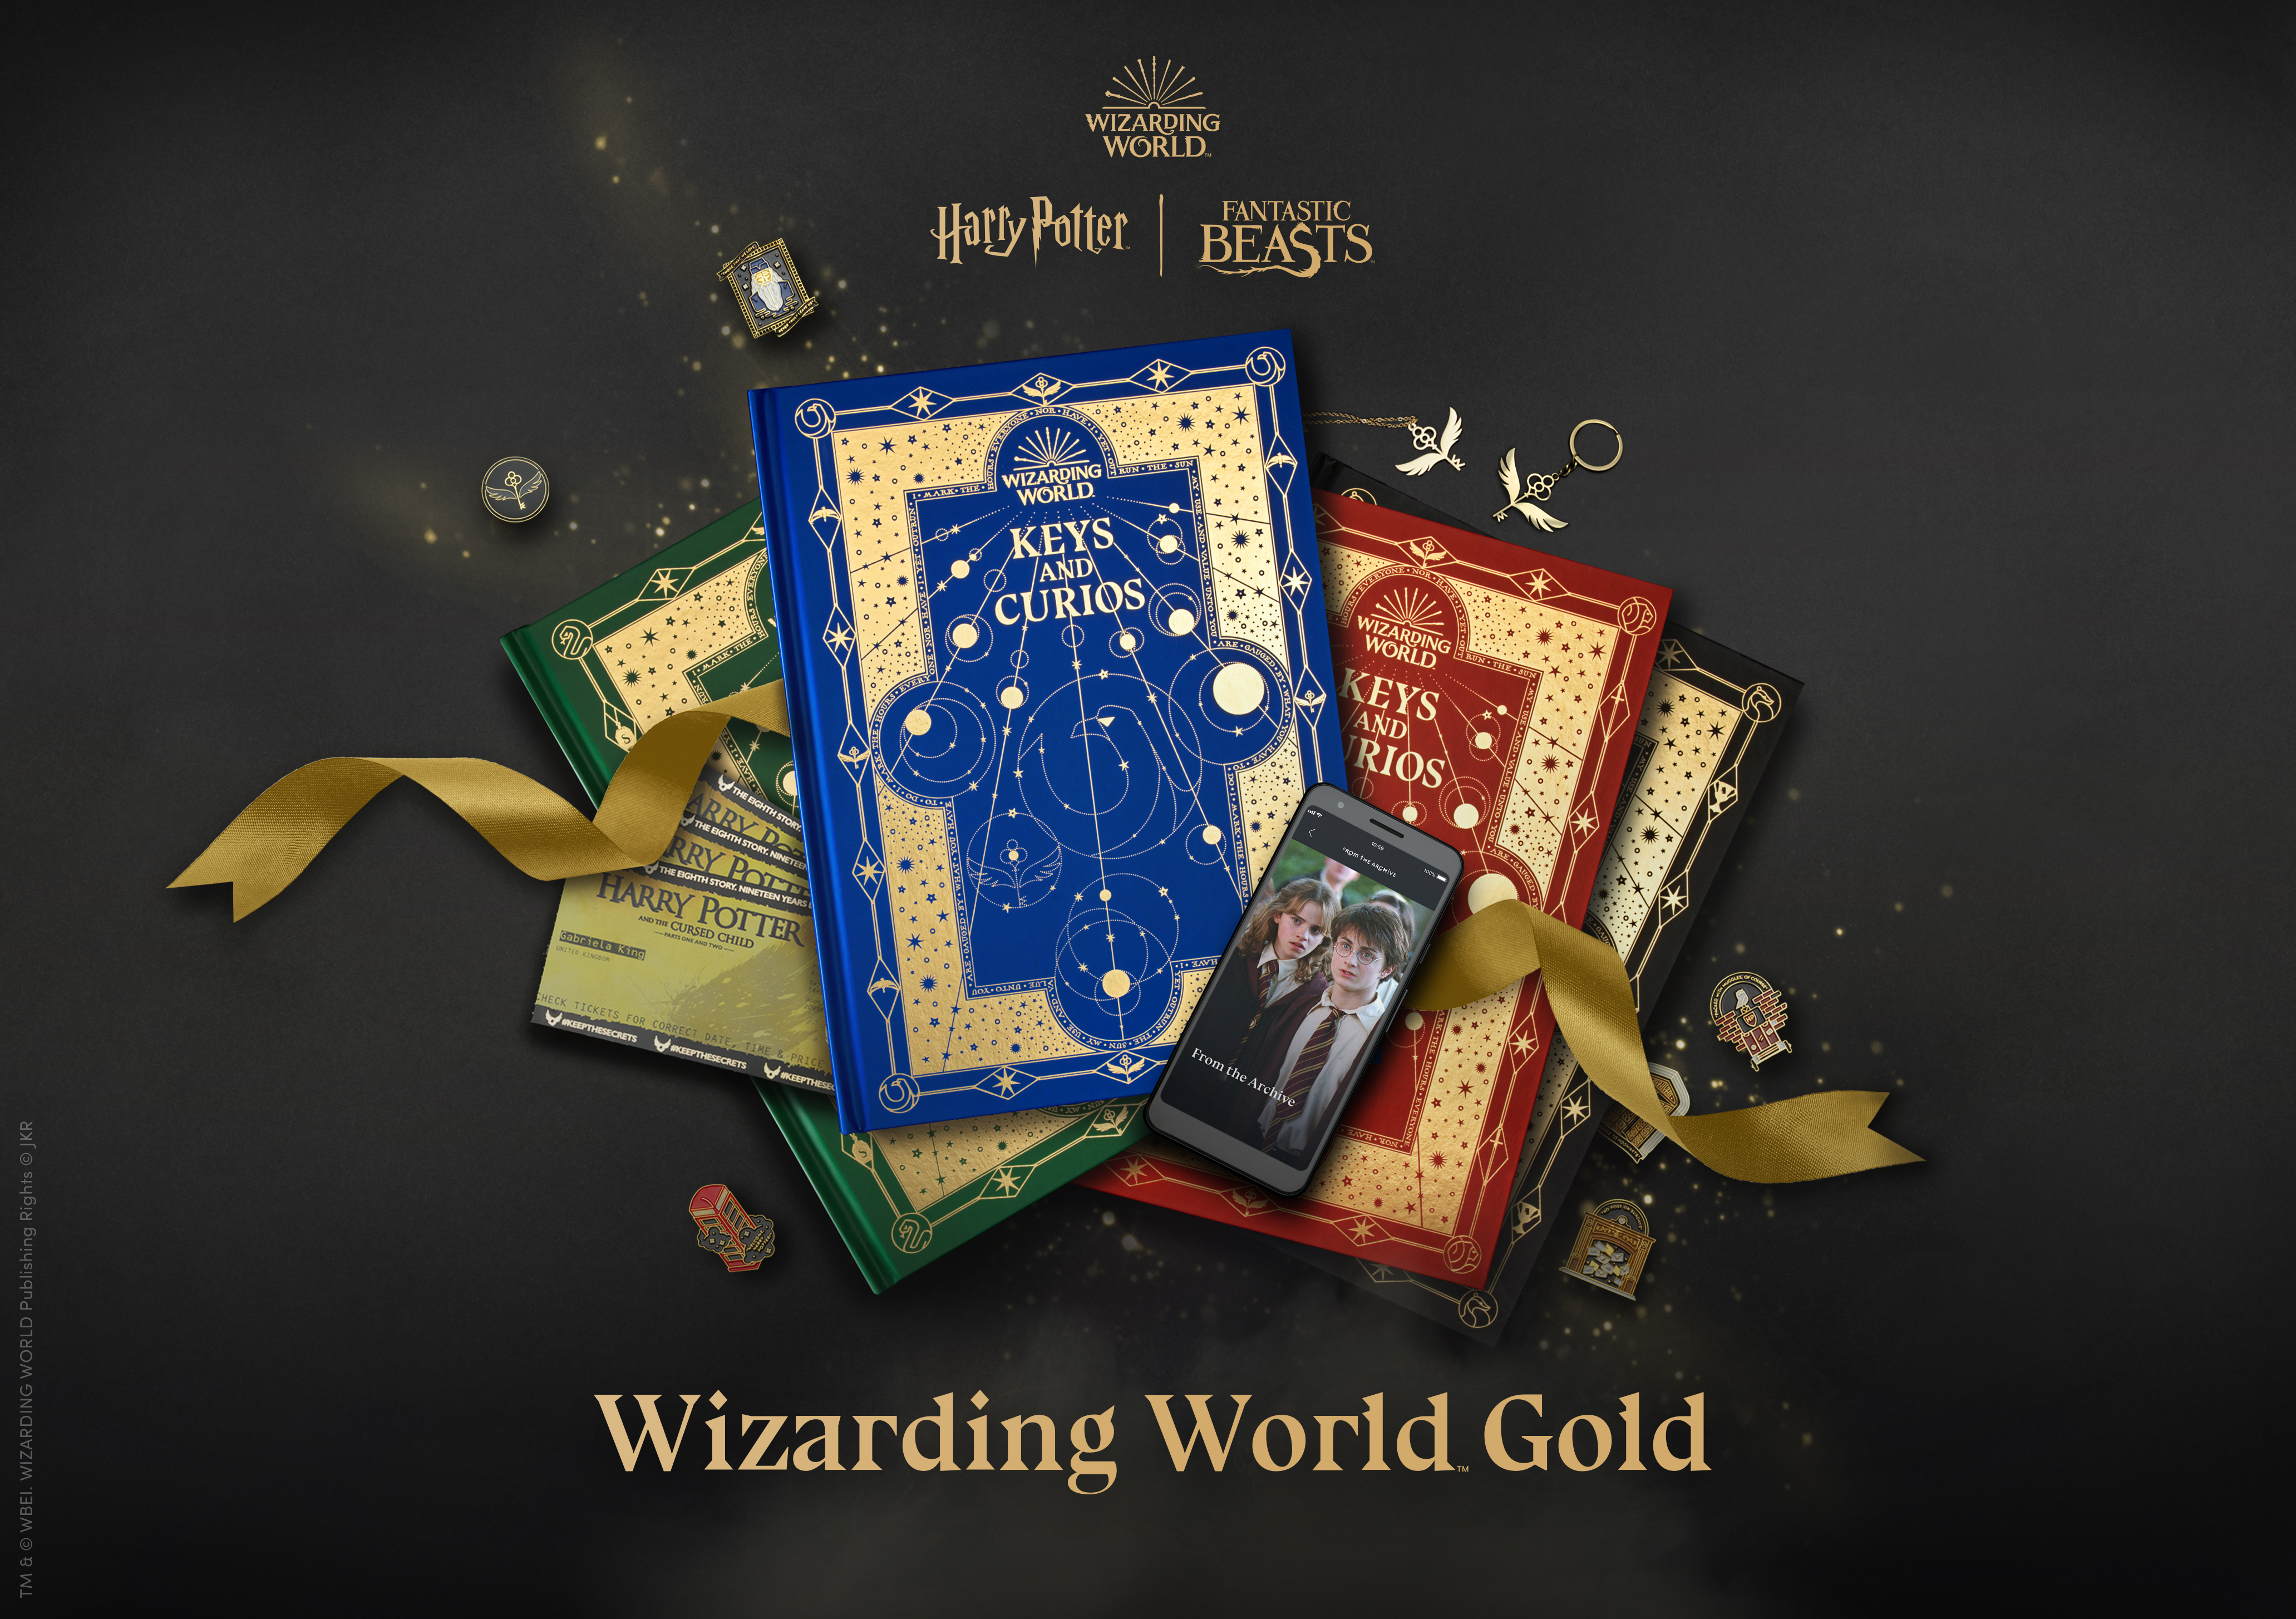 Wizarding World Gold is officially live.